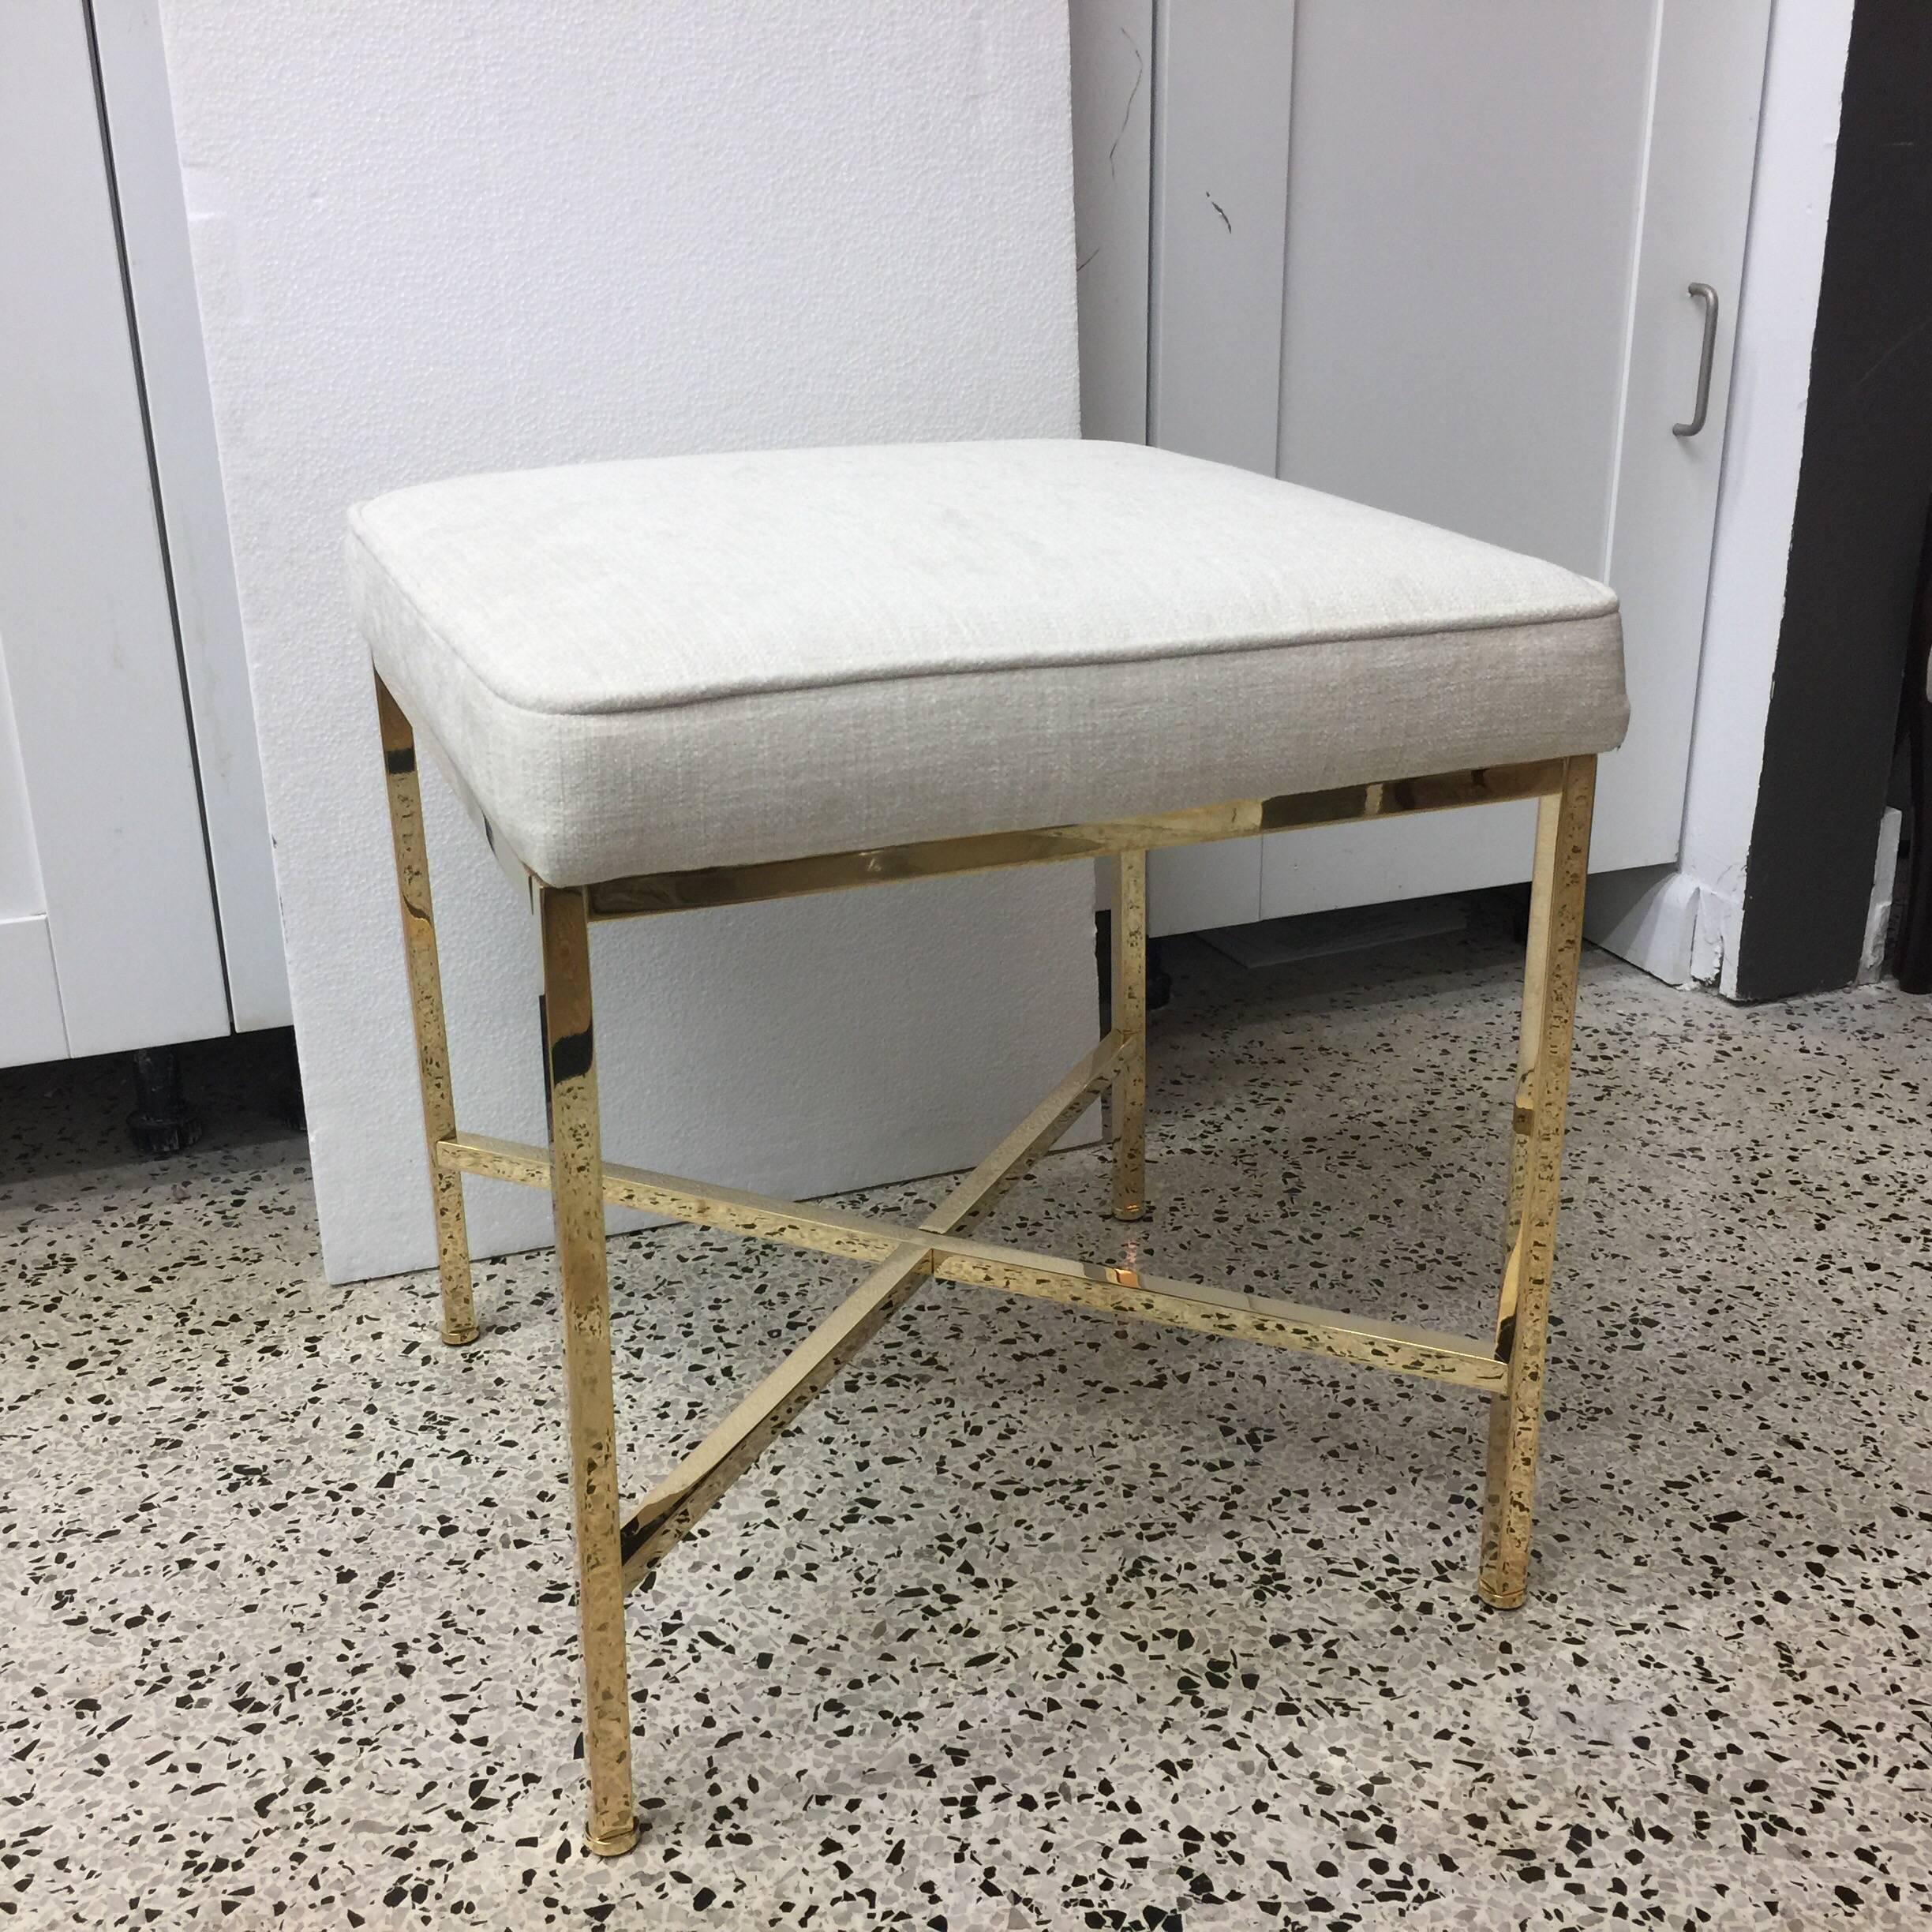 This Classic vintage brass X-frame base bench by Harvey Probber has been polished and reupholstered.